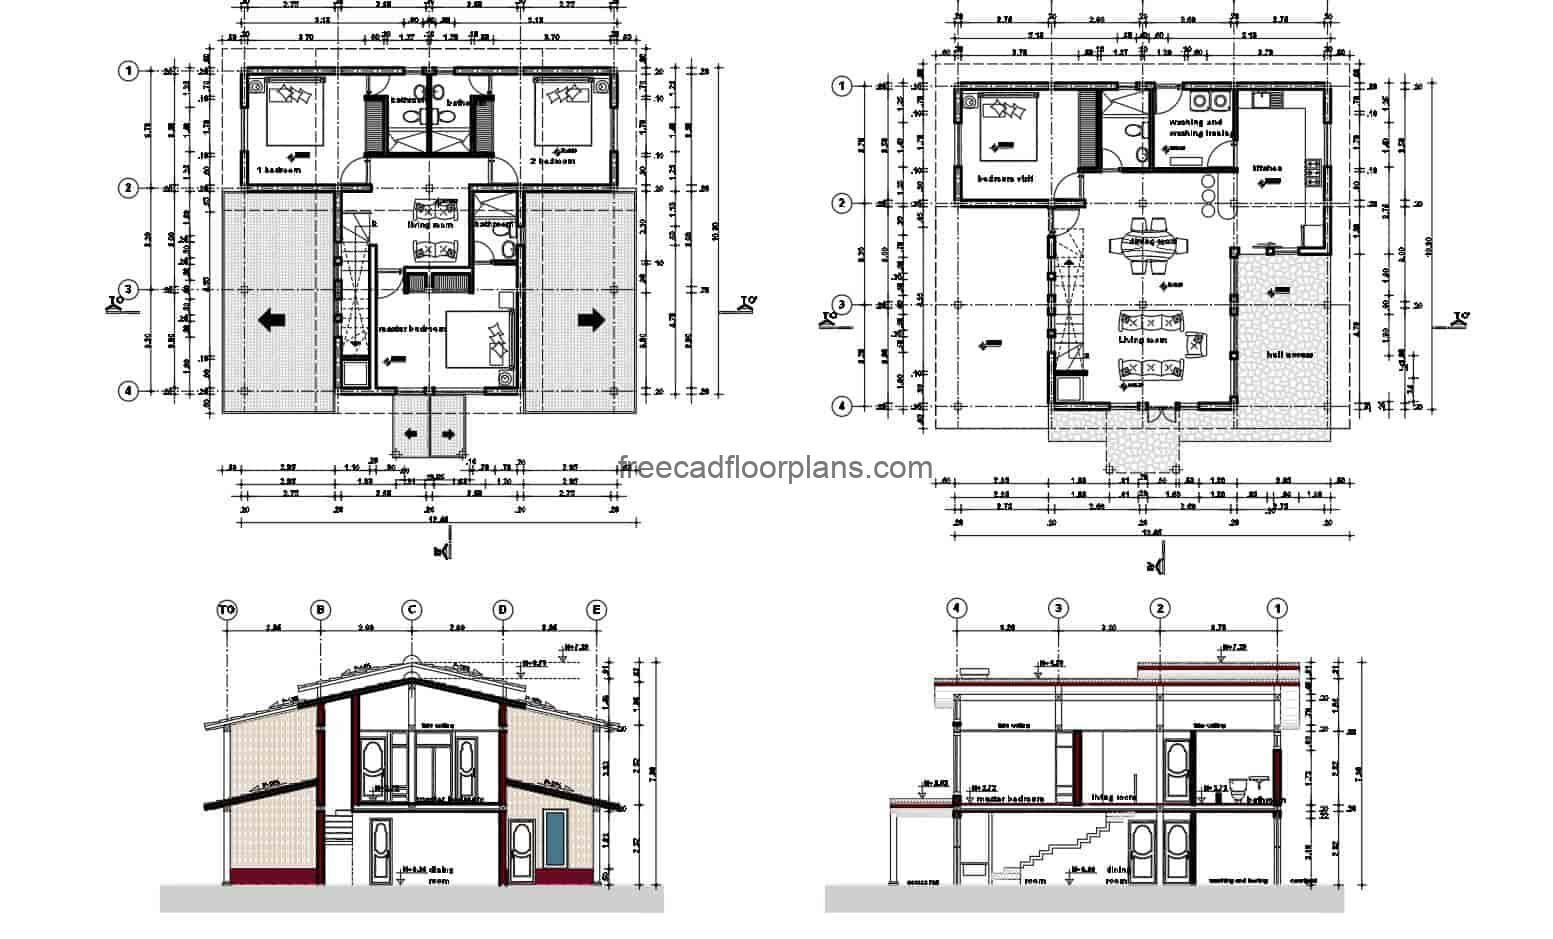 Architectural plans for a two-level country house with three bedrooms, front wood cladding, dimensional plans, electrical, sanitary, elevation sections. Overall plan, country house with side and front terraces. Blueprints for free download in Autocad DWG format, editable DWG interior blocks.